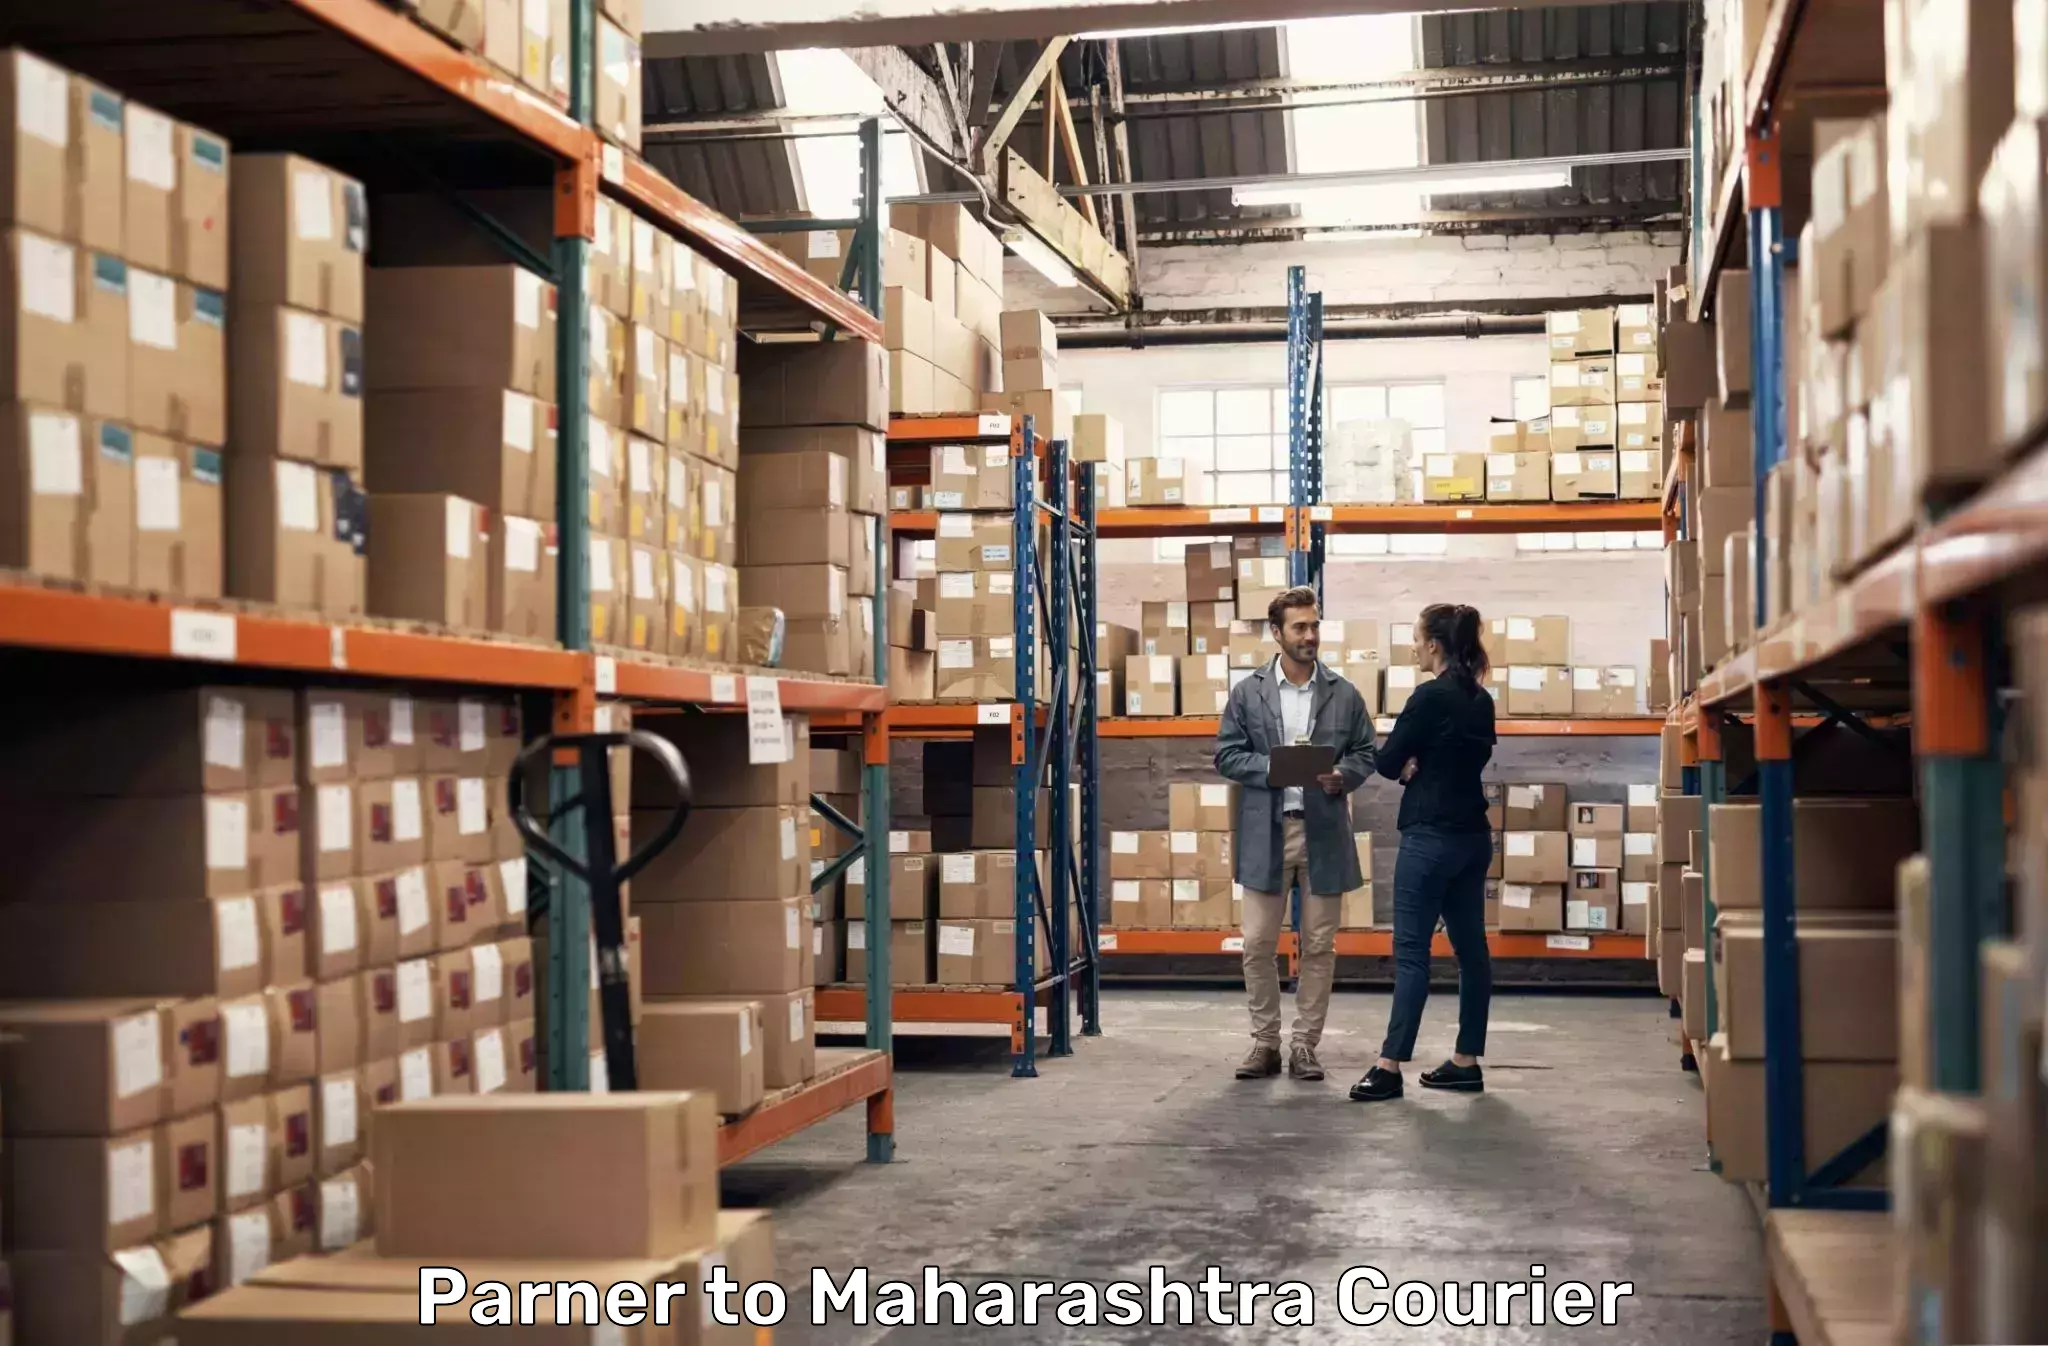 Flexible delivery schedules Parner to Lonar